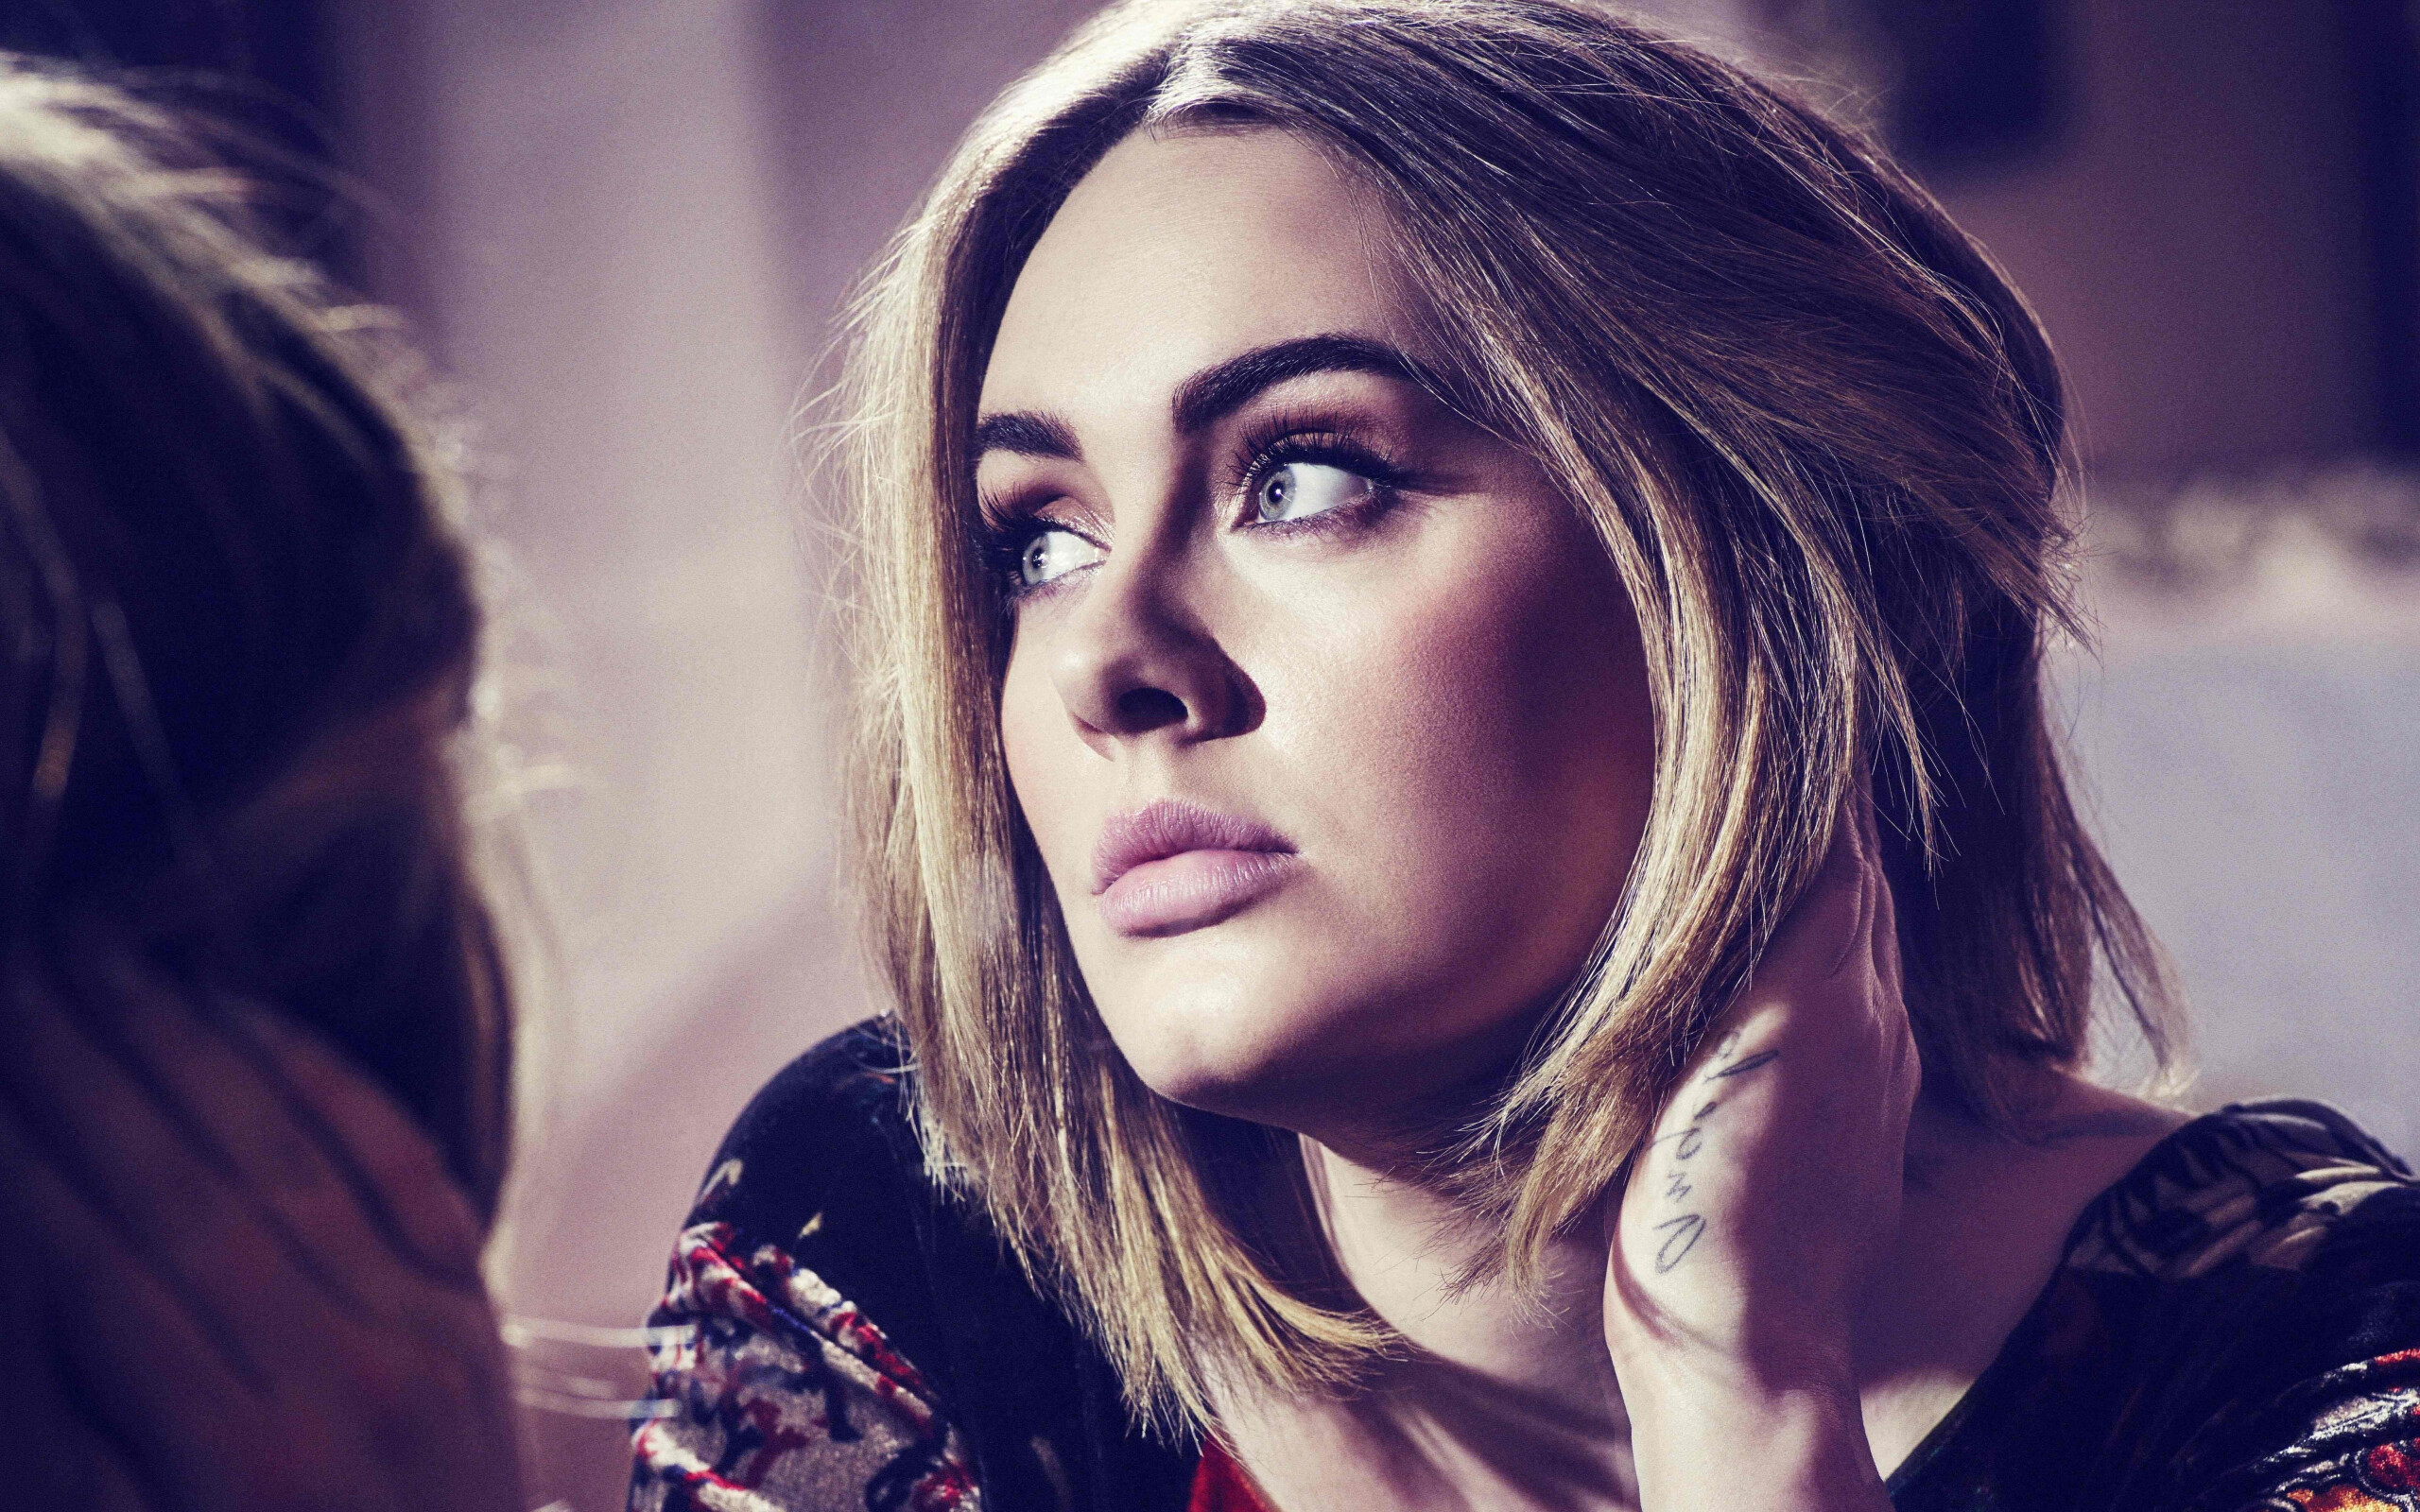 Adele: Named one of the most influential people in the world, Time magazine. 2560x1600 HD Wallpaper.